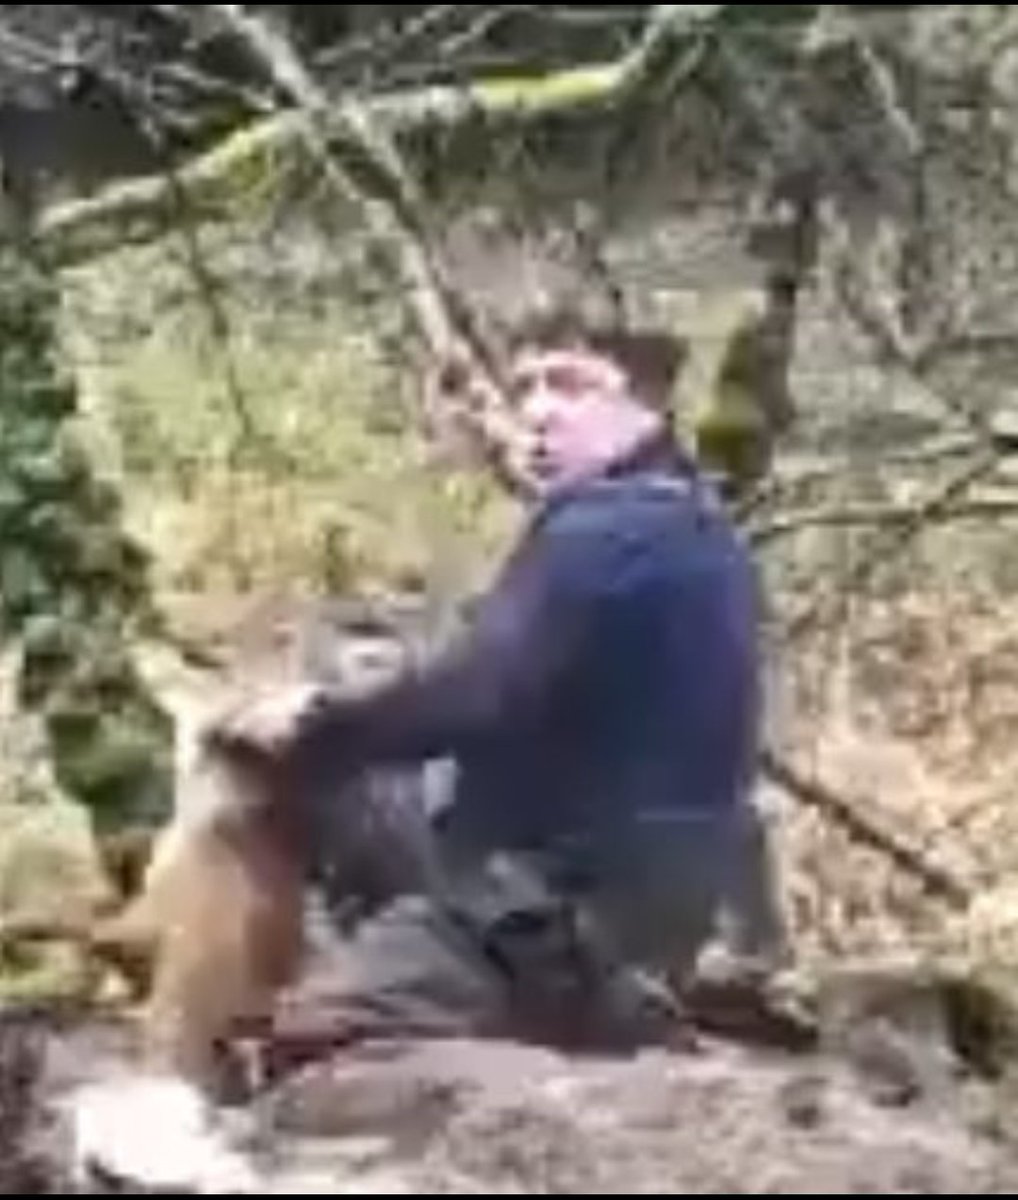 This is Oliver Thompson of the Old Berkshire hunt kennels who dug up a fox & threw it alive to the pack of hounds where it was ripped to shreds. I find it difficult to understand what would drive someone to act in such a vile, cruel way. I wish him and those with him misery.